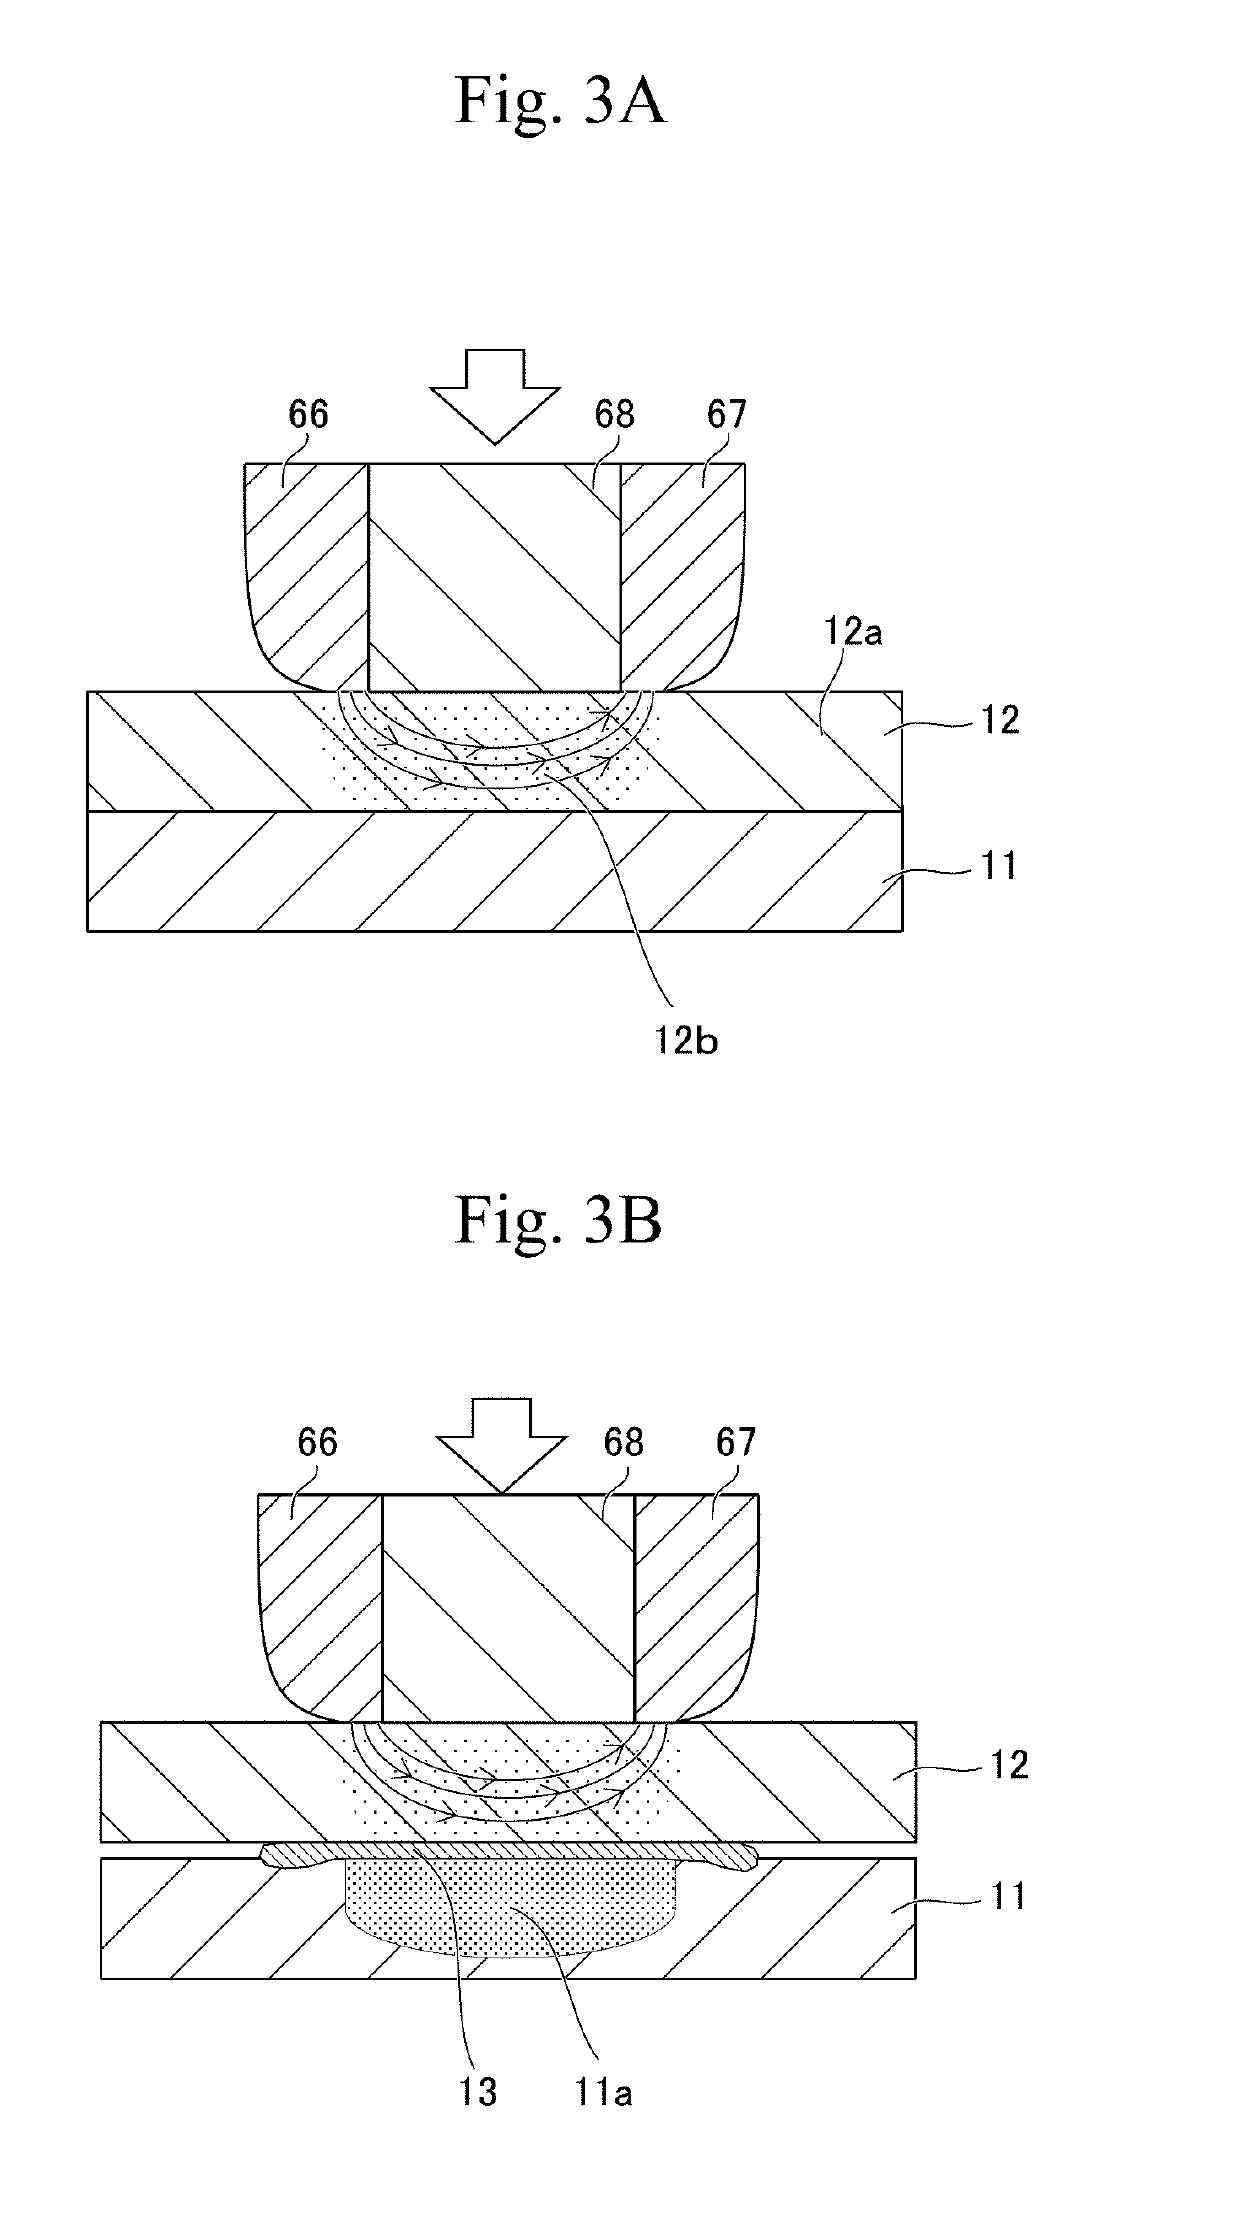 Method for joining dissimilar metal plates